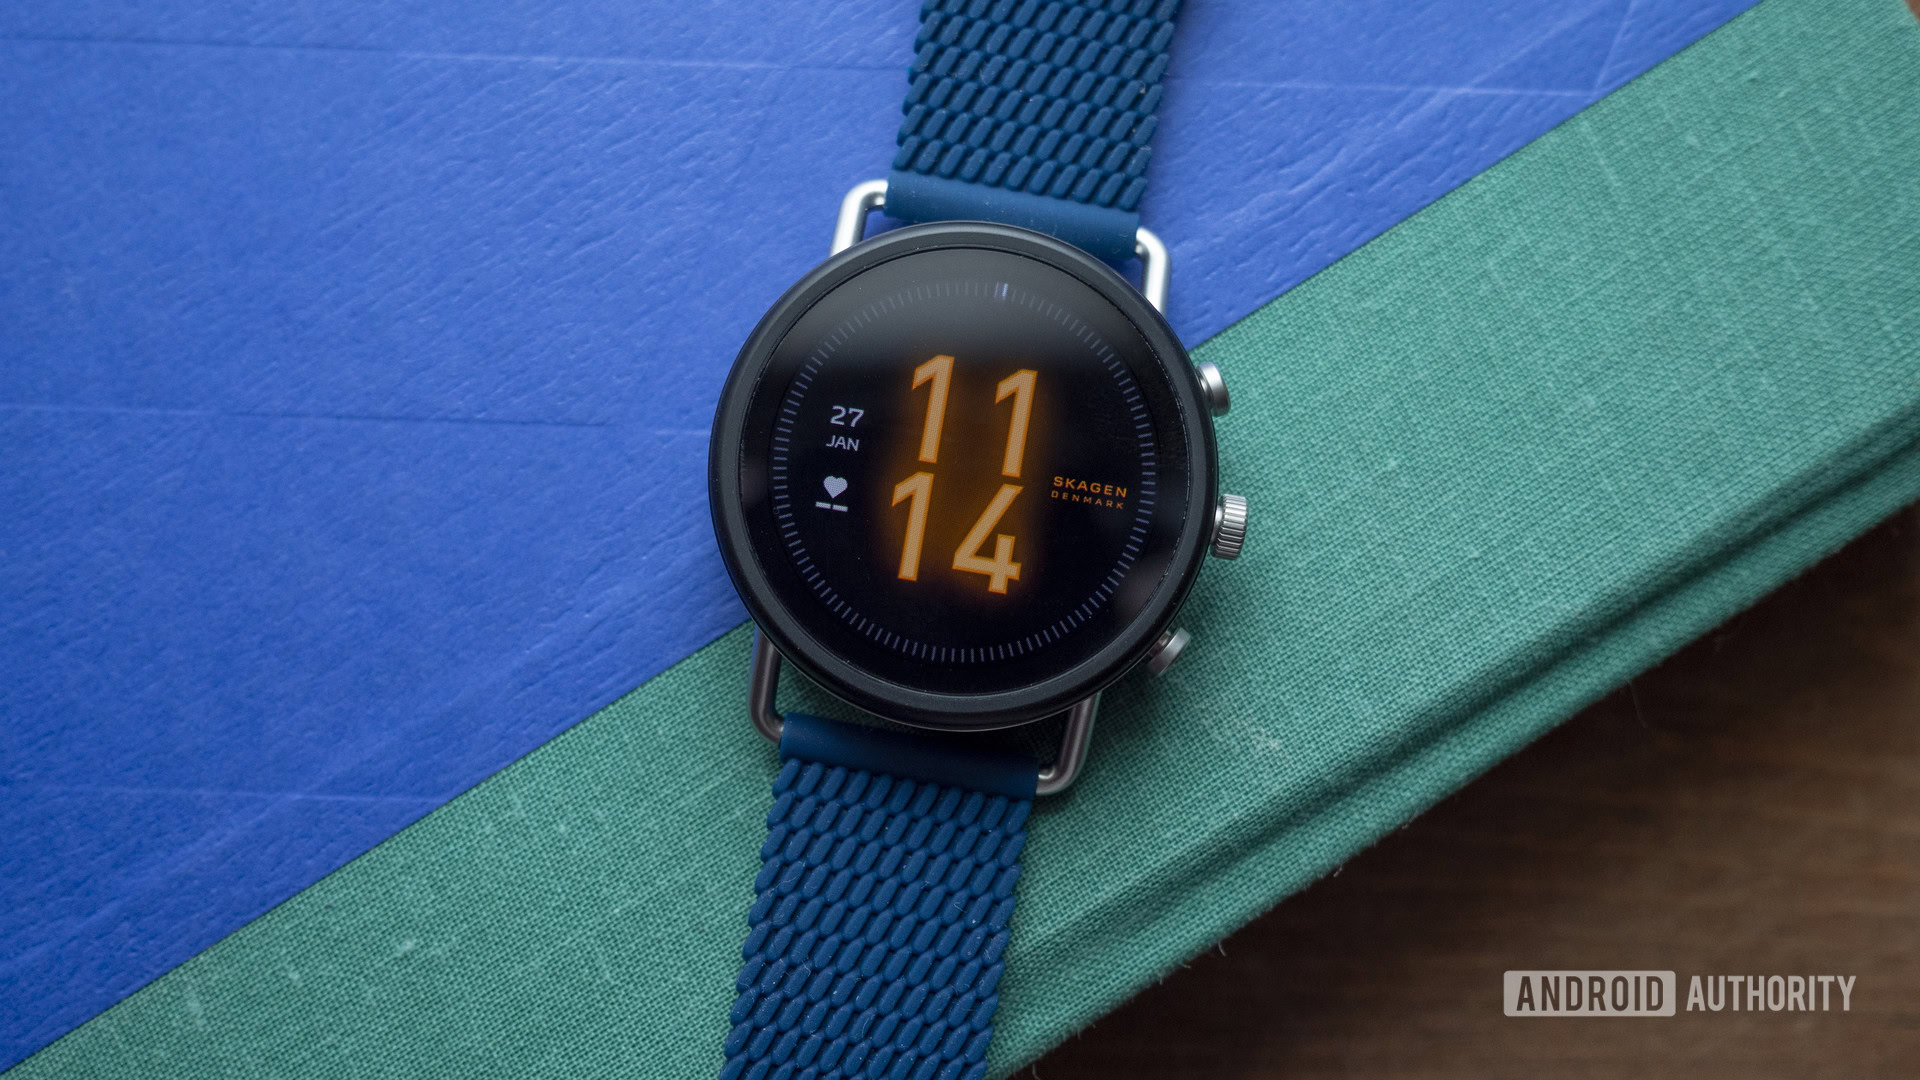 SKAGEN Falster 3 review: Righting the wrongs of its predecessors